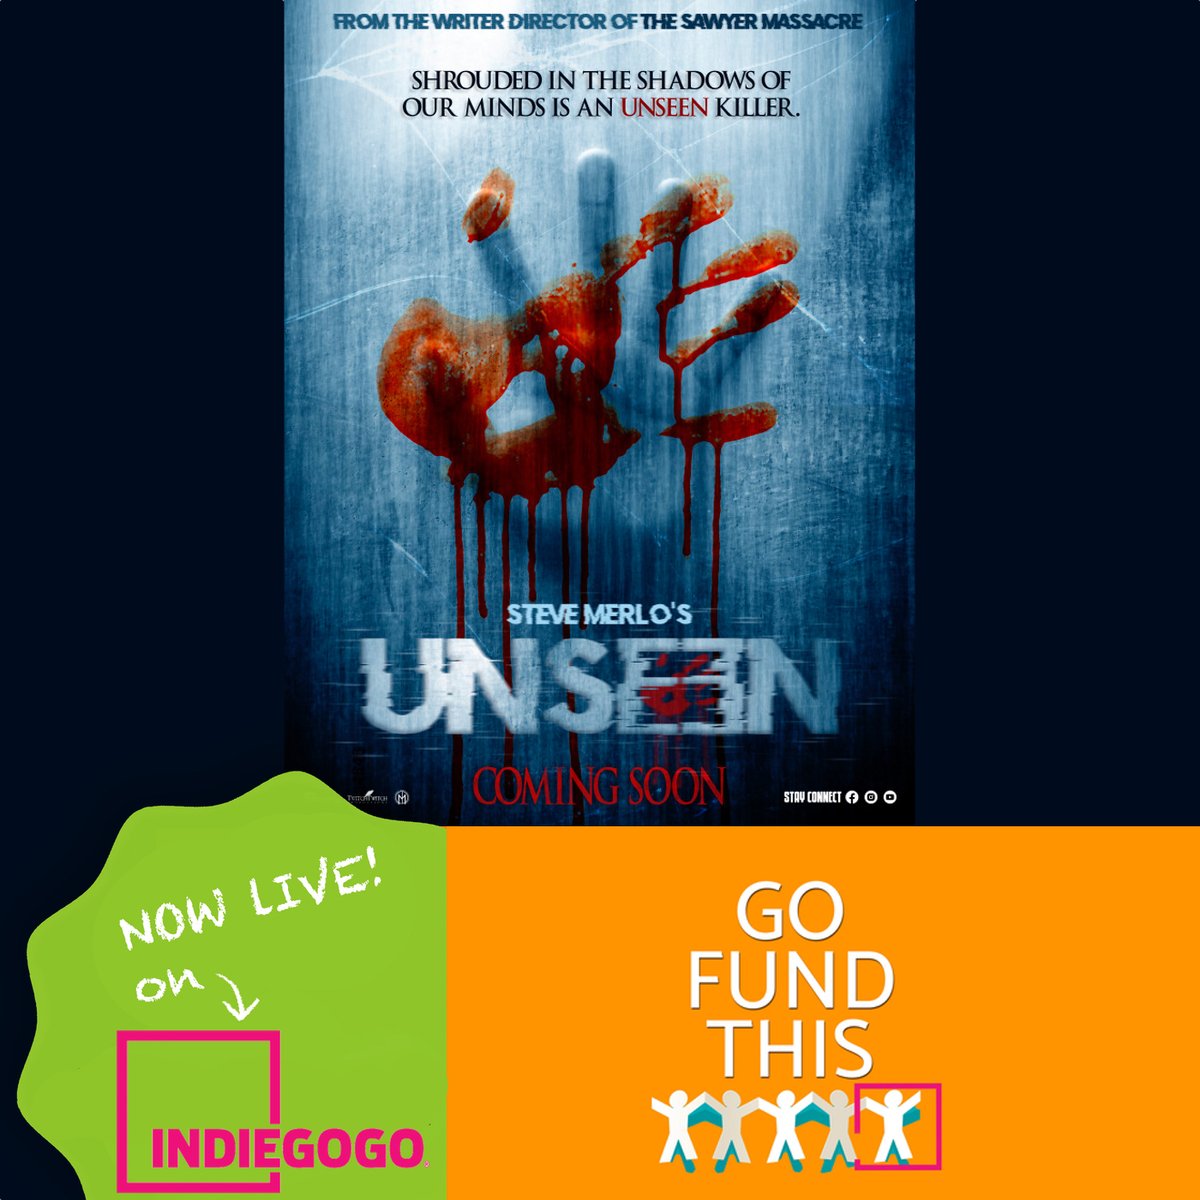 NEW EPISODE! Rob interviews Steve Merlo about the Indiegogo for the horror feature film, 'Unseen' 

Apple bit.ly/3J3zHFk
Spotify bit.ly/3Nmaby0
Stitcher bit.ly/45TARNt

#unseen #supportindiehorror #indiegogo #HorrorCommunity